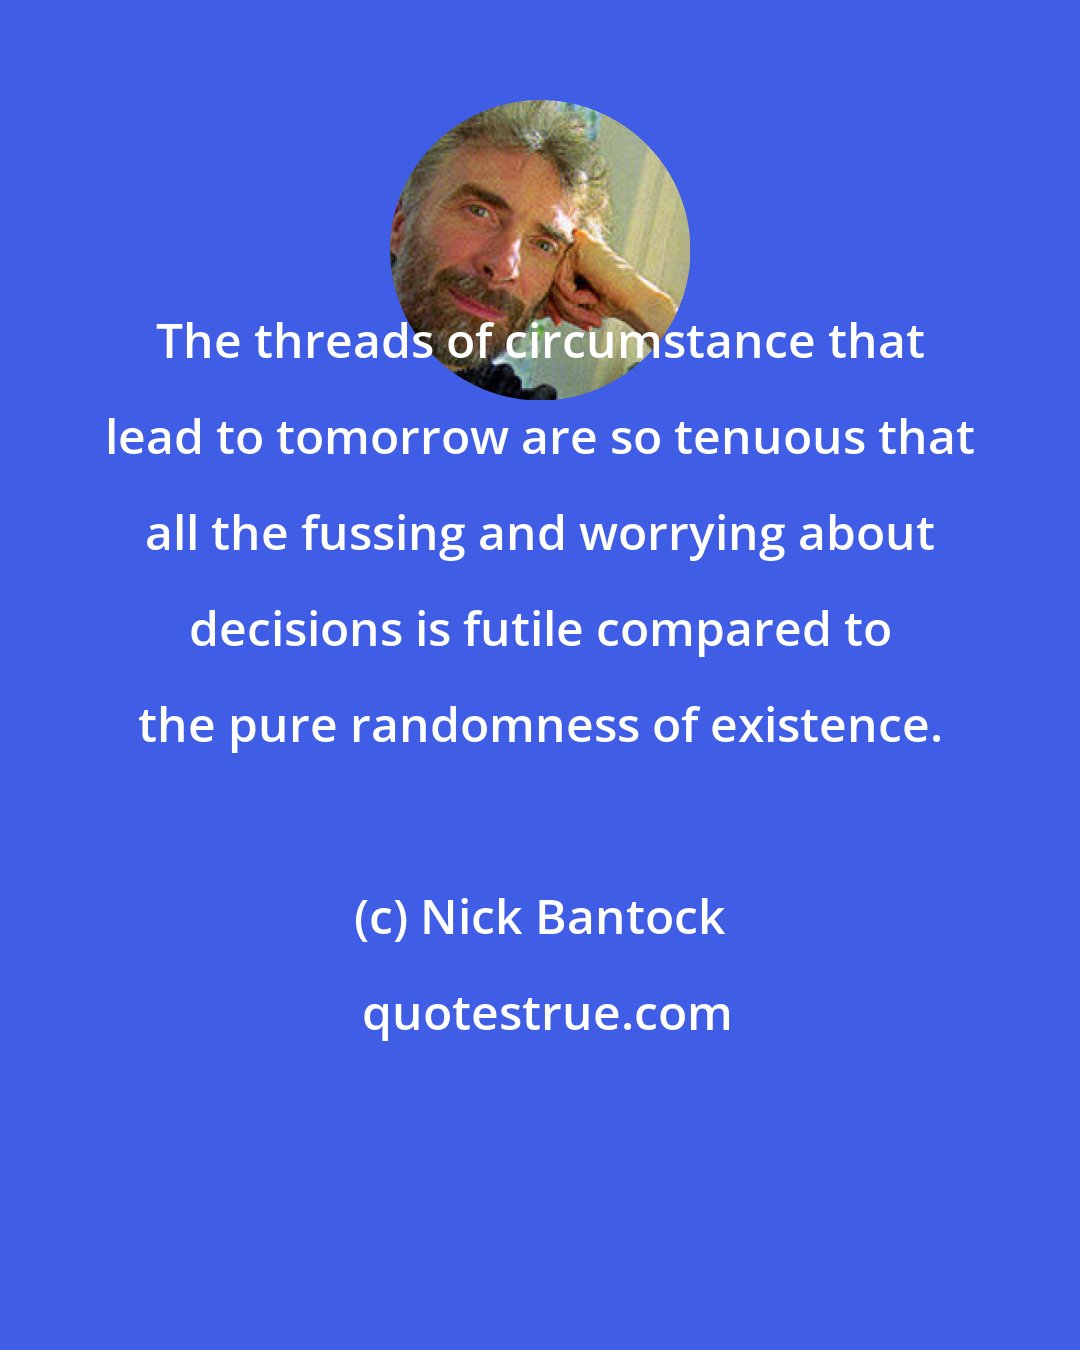 Nick Bantock: The threads of circumstance that lead to tomorrow are so tenuous that all the fussing and worrying about decisions is futile compared to the pure randomness of existence.